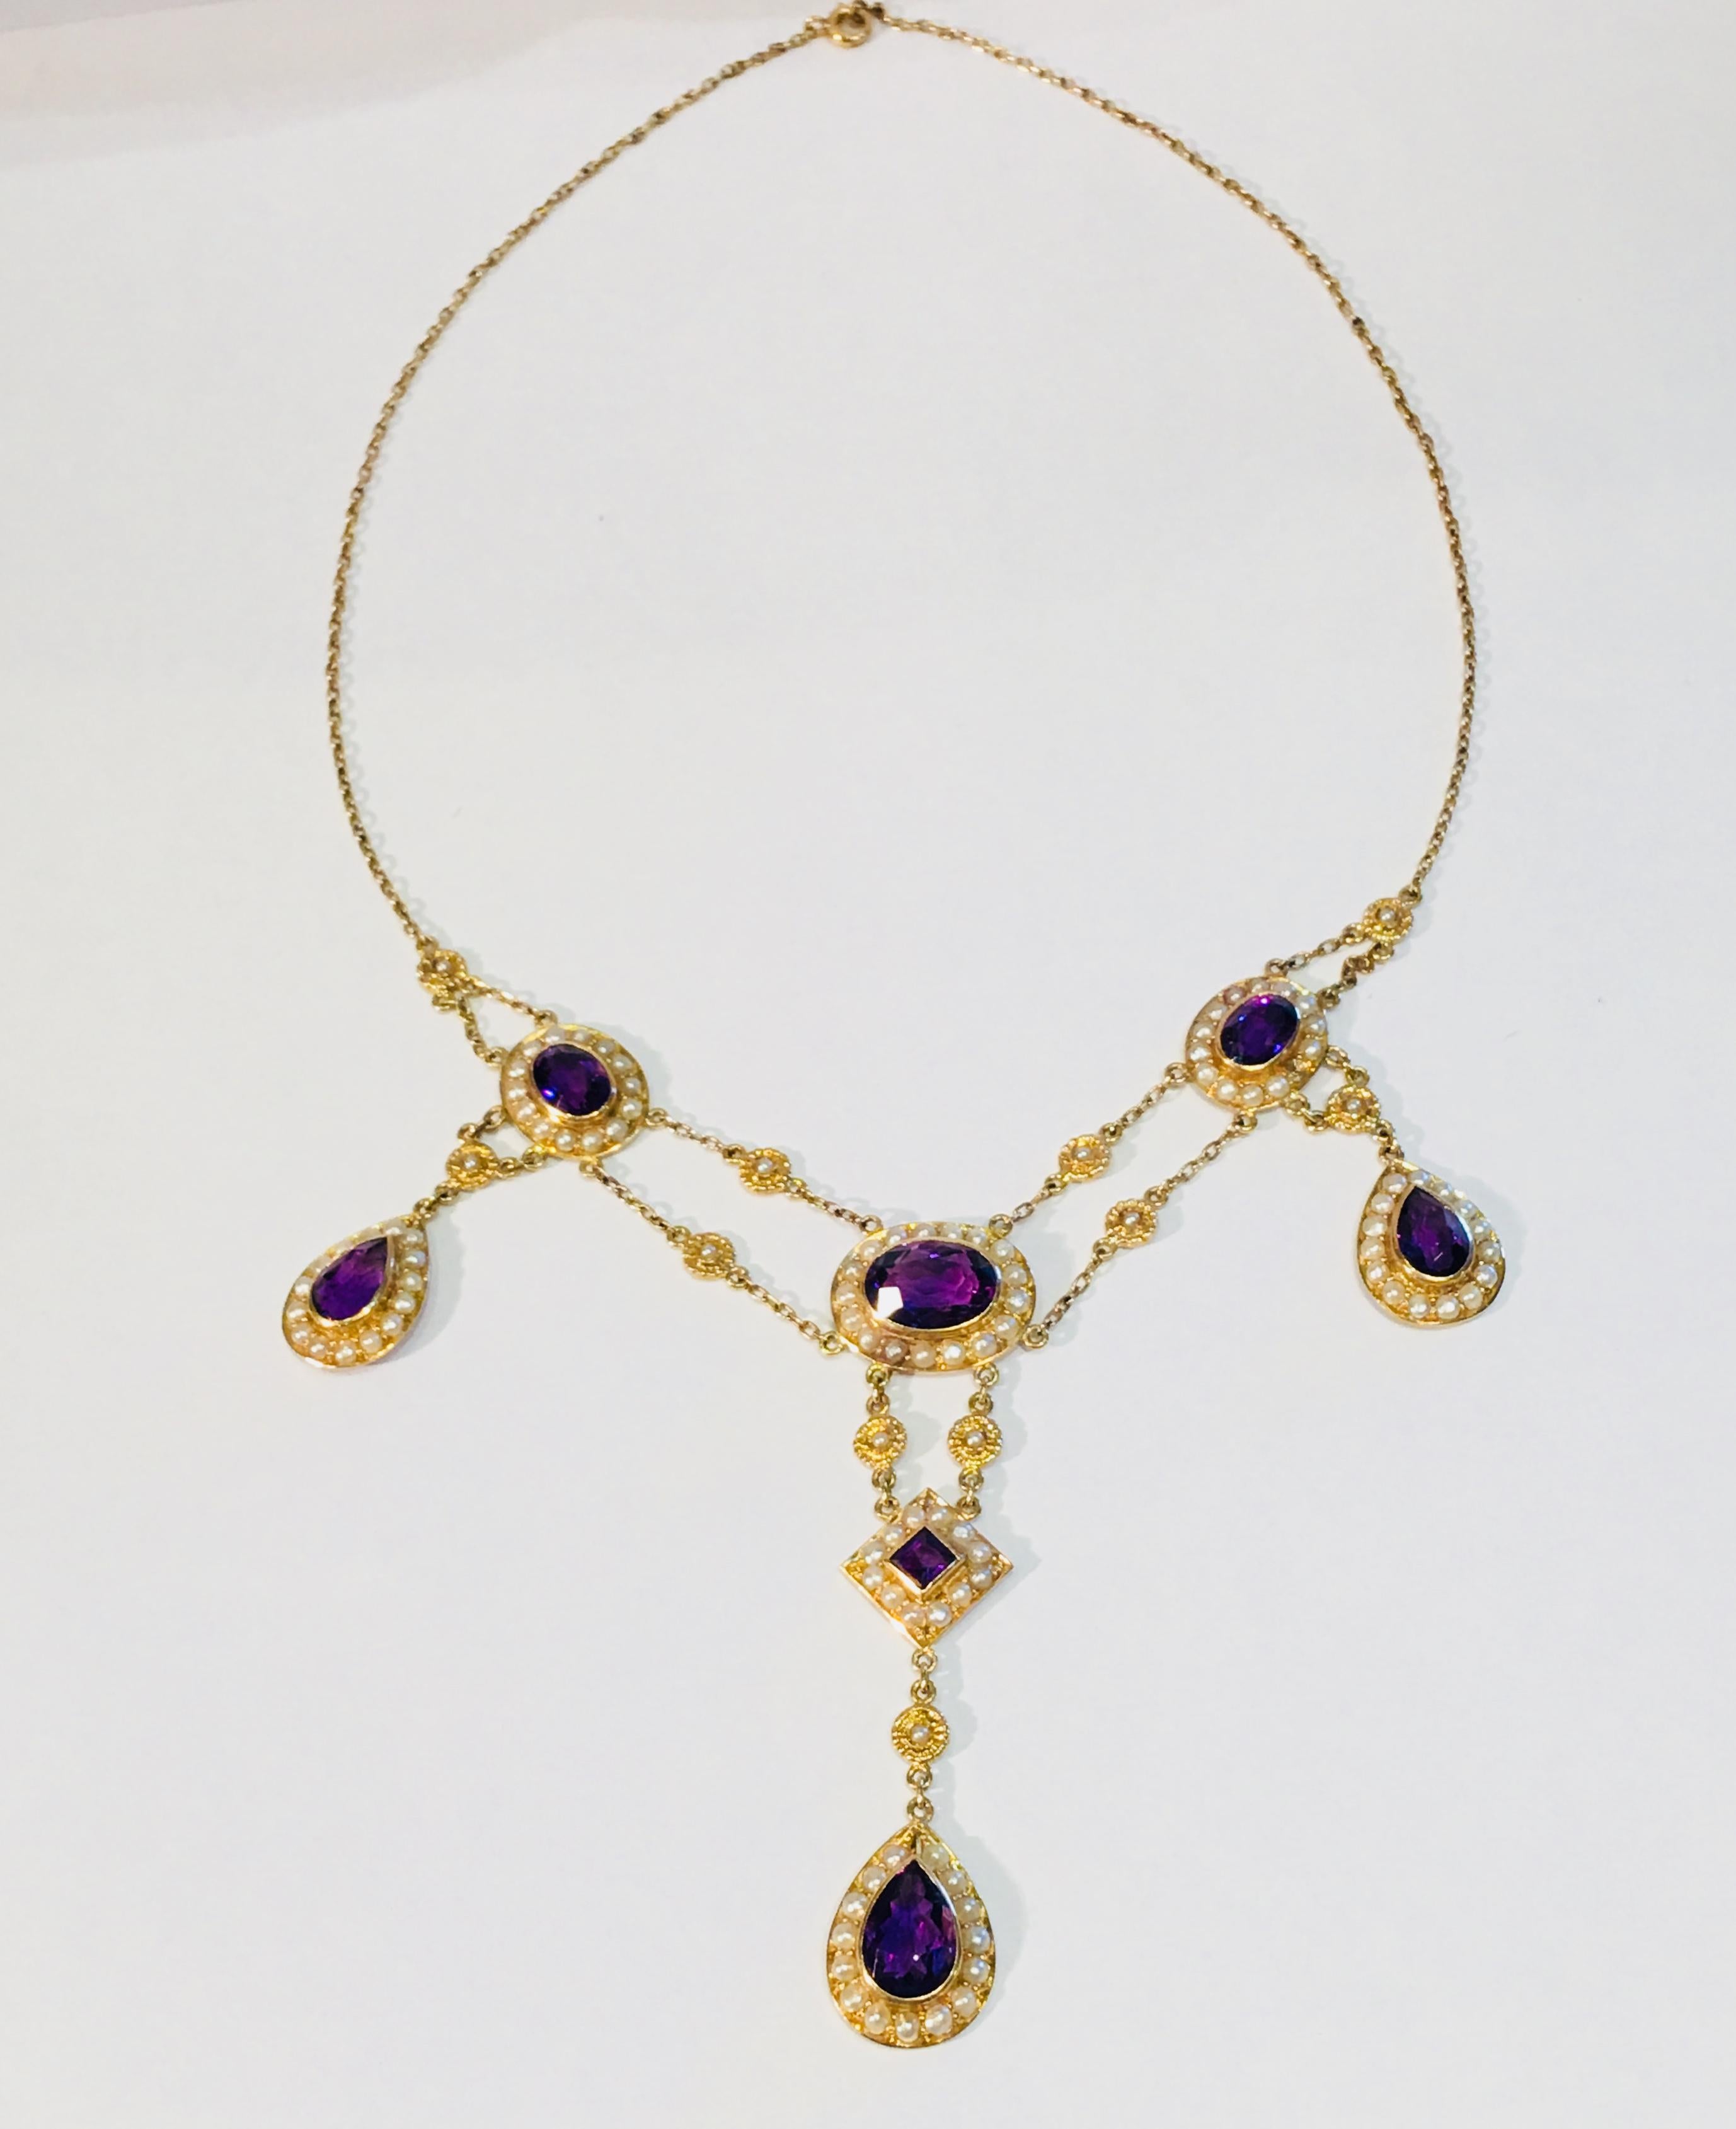 Victorian Stunning Vintage Siberian Amethyst Pearl Yellow Gold Chandelier Necklace